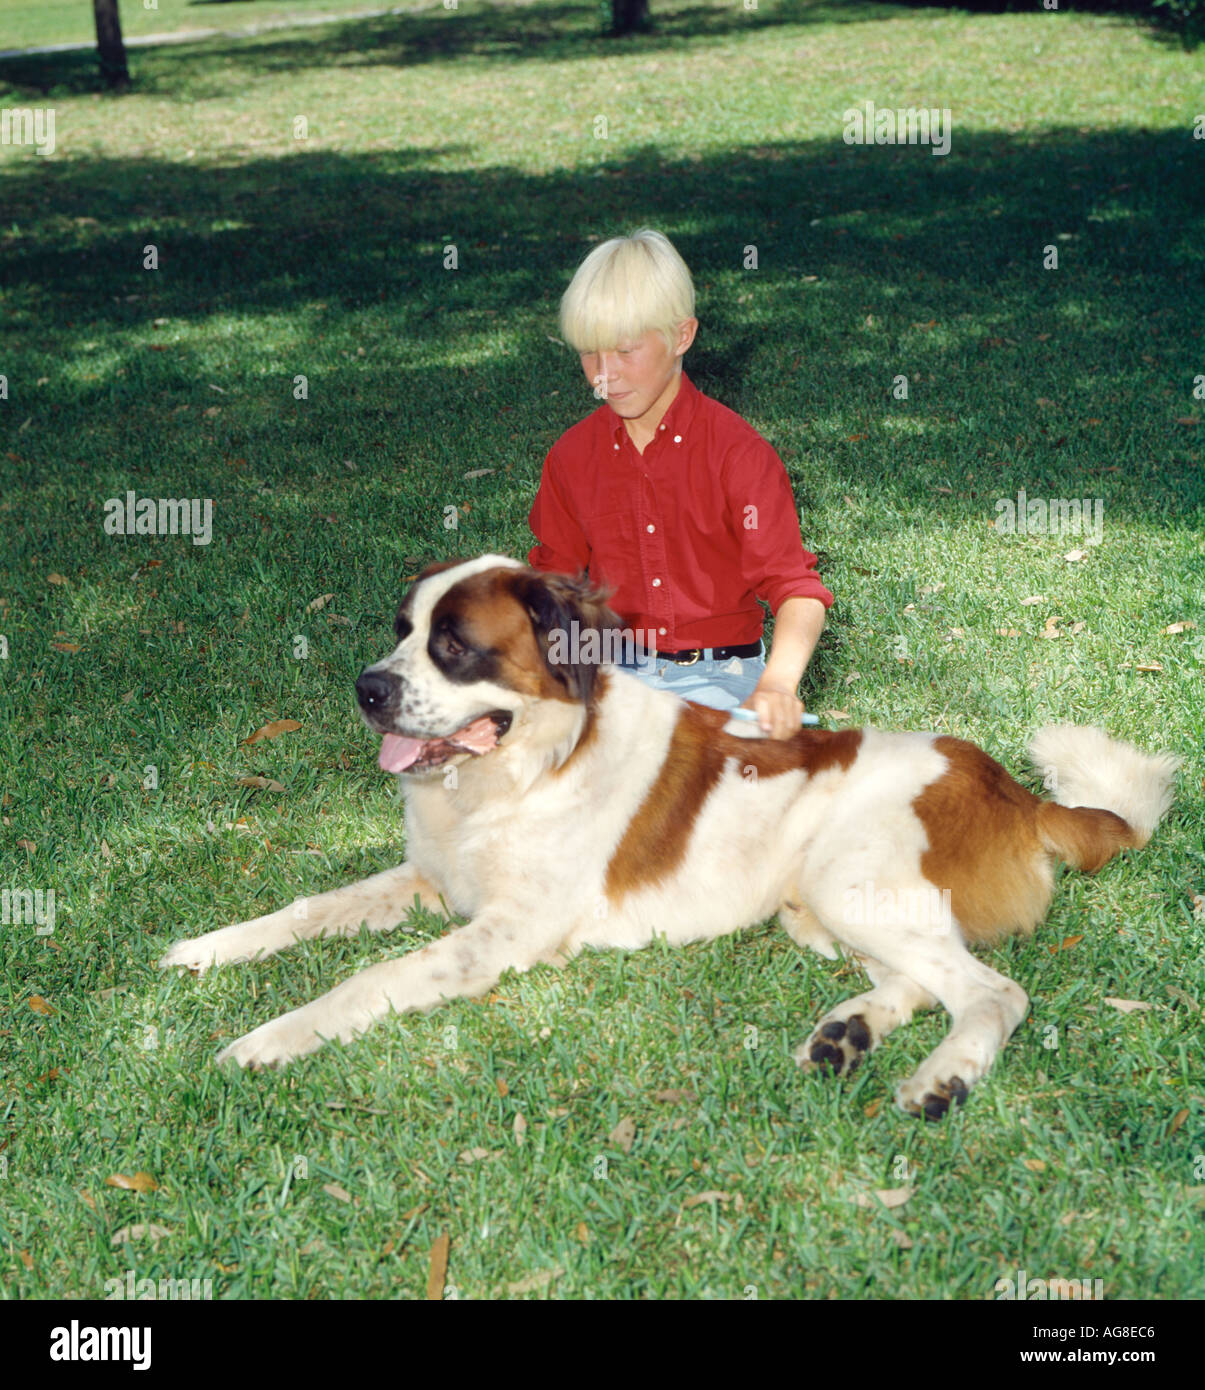 Young Boy Gets Acquainted With His New Pet A Saint Bernard Dog Stock Photo Alamy